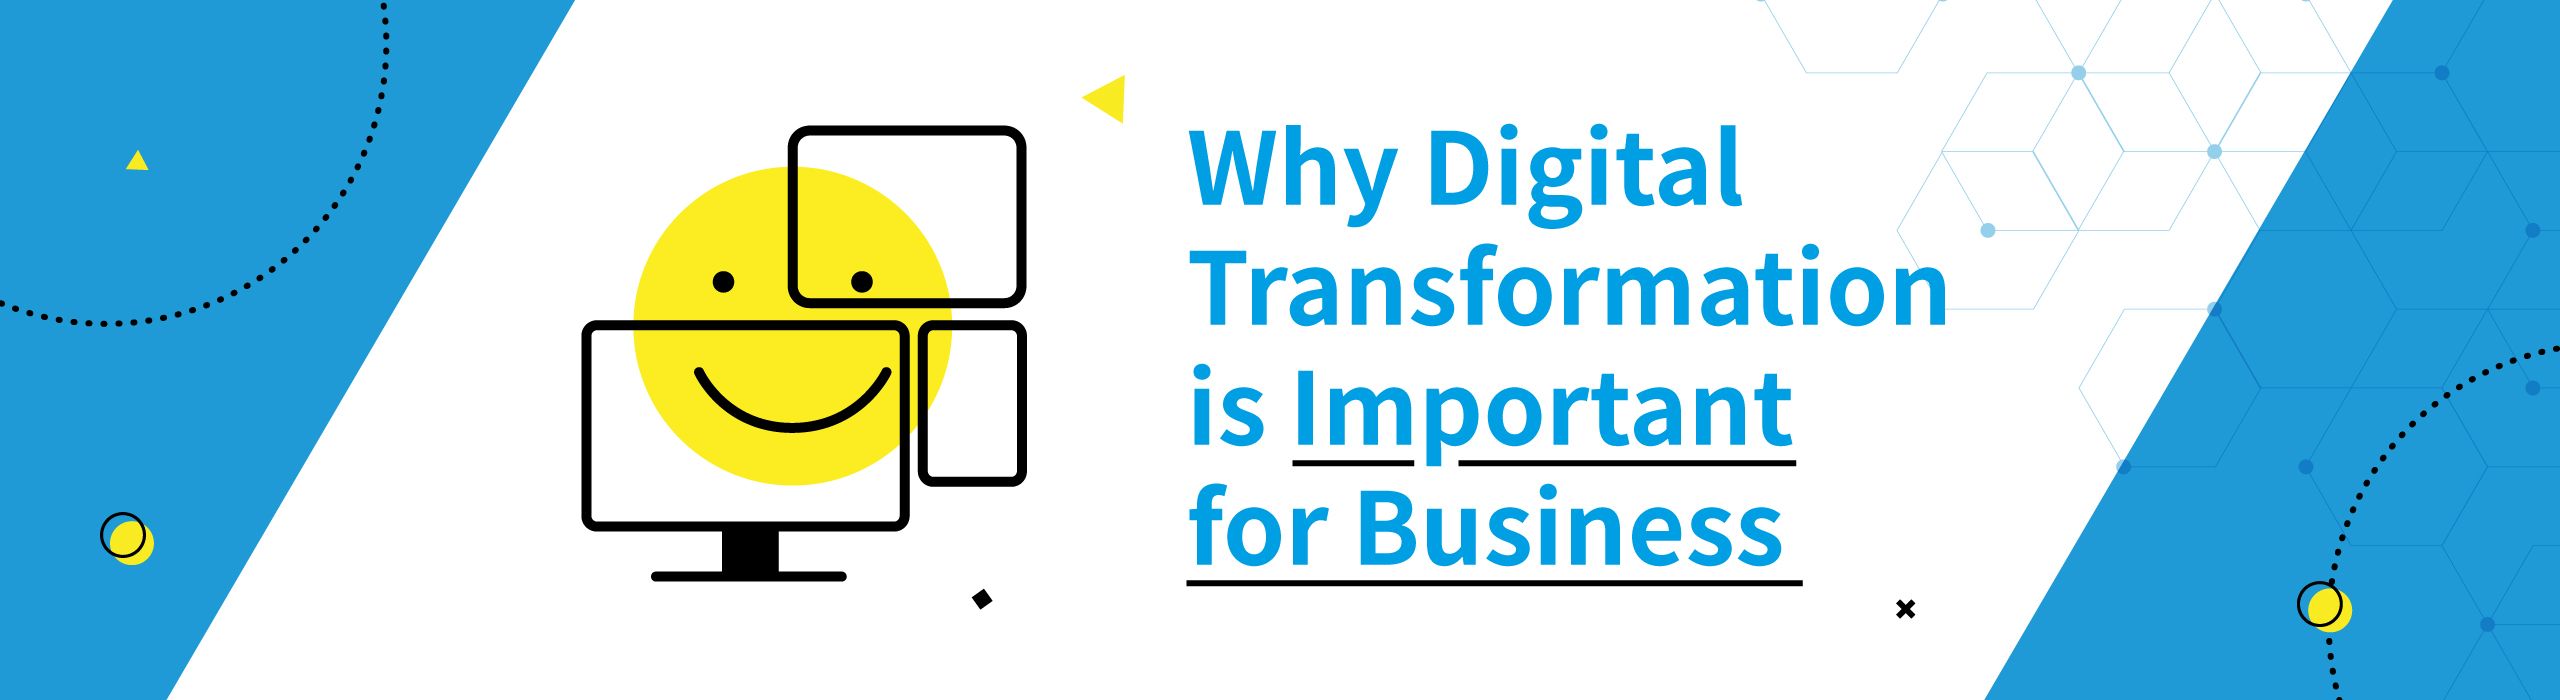 TITLE: Why Digital Transformation is Important for Business